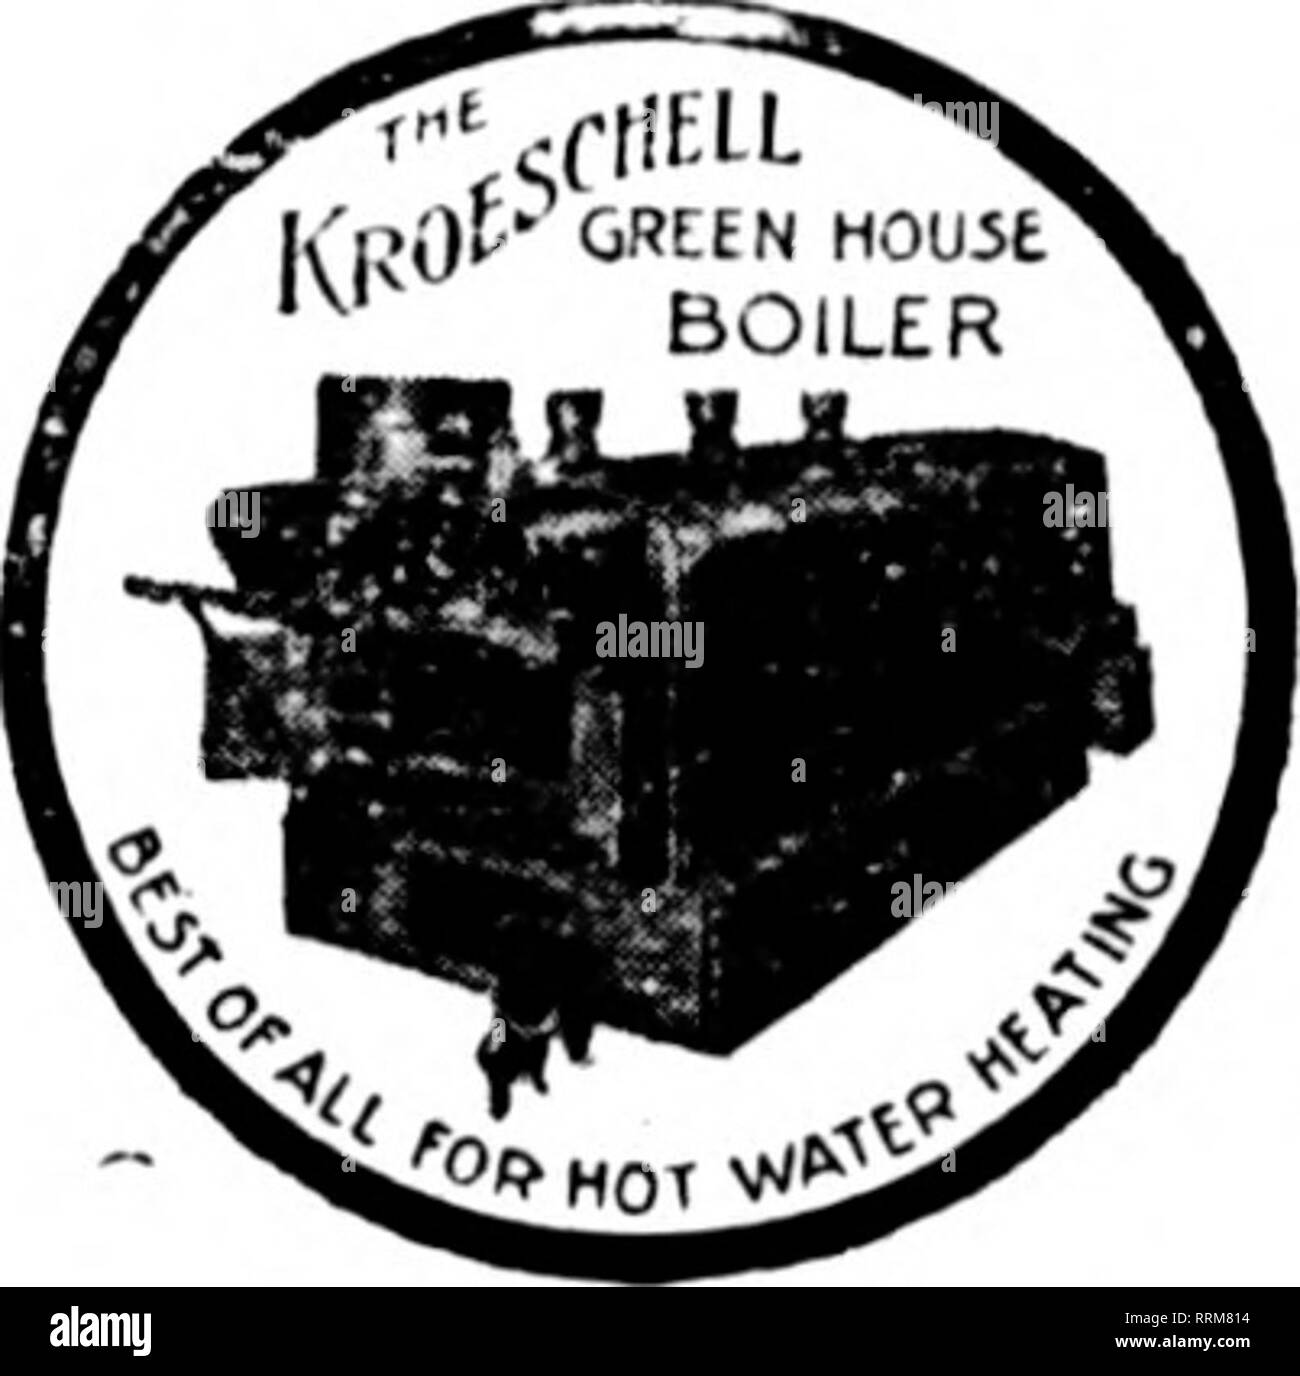 . Florists' review [microform]. Floriculture. KROESCHELL WATER TUBE STEAM BOILER For steam plants less than lOO horse power. S^f No tubes to clean. No masonry required. If you are in a hurry for a boiler telegraph or telephone at our expense You can positively rely on Kroeschell Boilers to produce an even and steady supply of heat, insuring the most perfect growing conditions at all times. KROESCHELL BOILERS have a larger proportion of direct fire surface than any other boiler, and are known as the quickest hot water heaters and the fastest steamers ever designed—easily installed—burn any kind Stock Photo